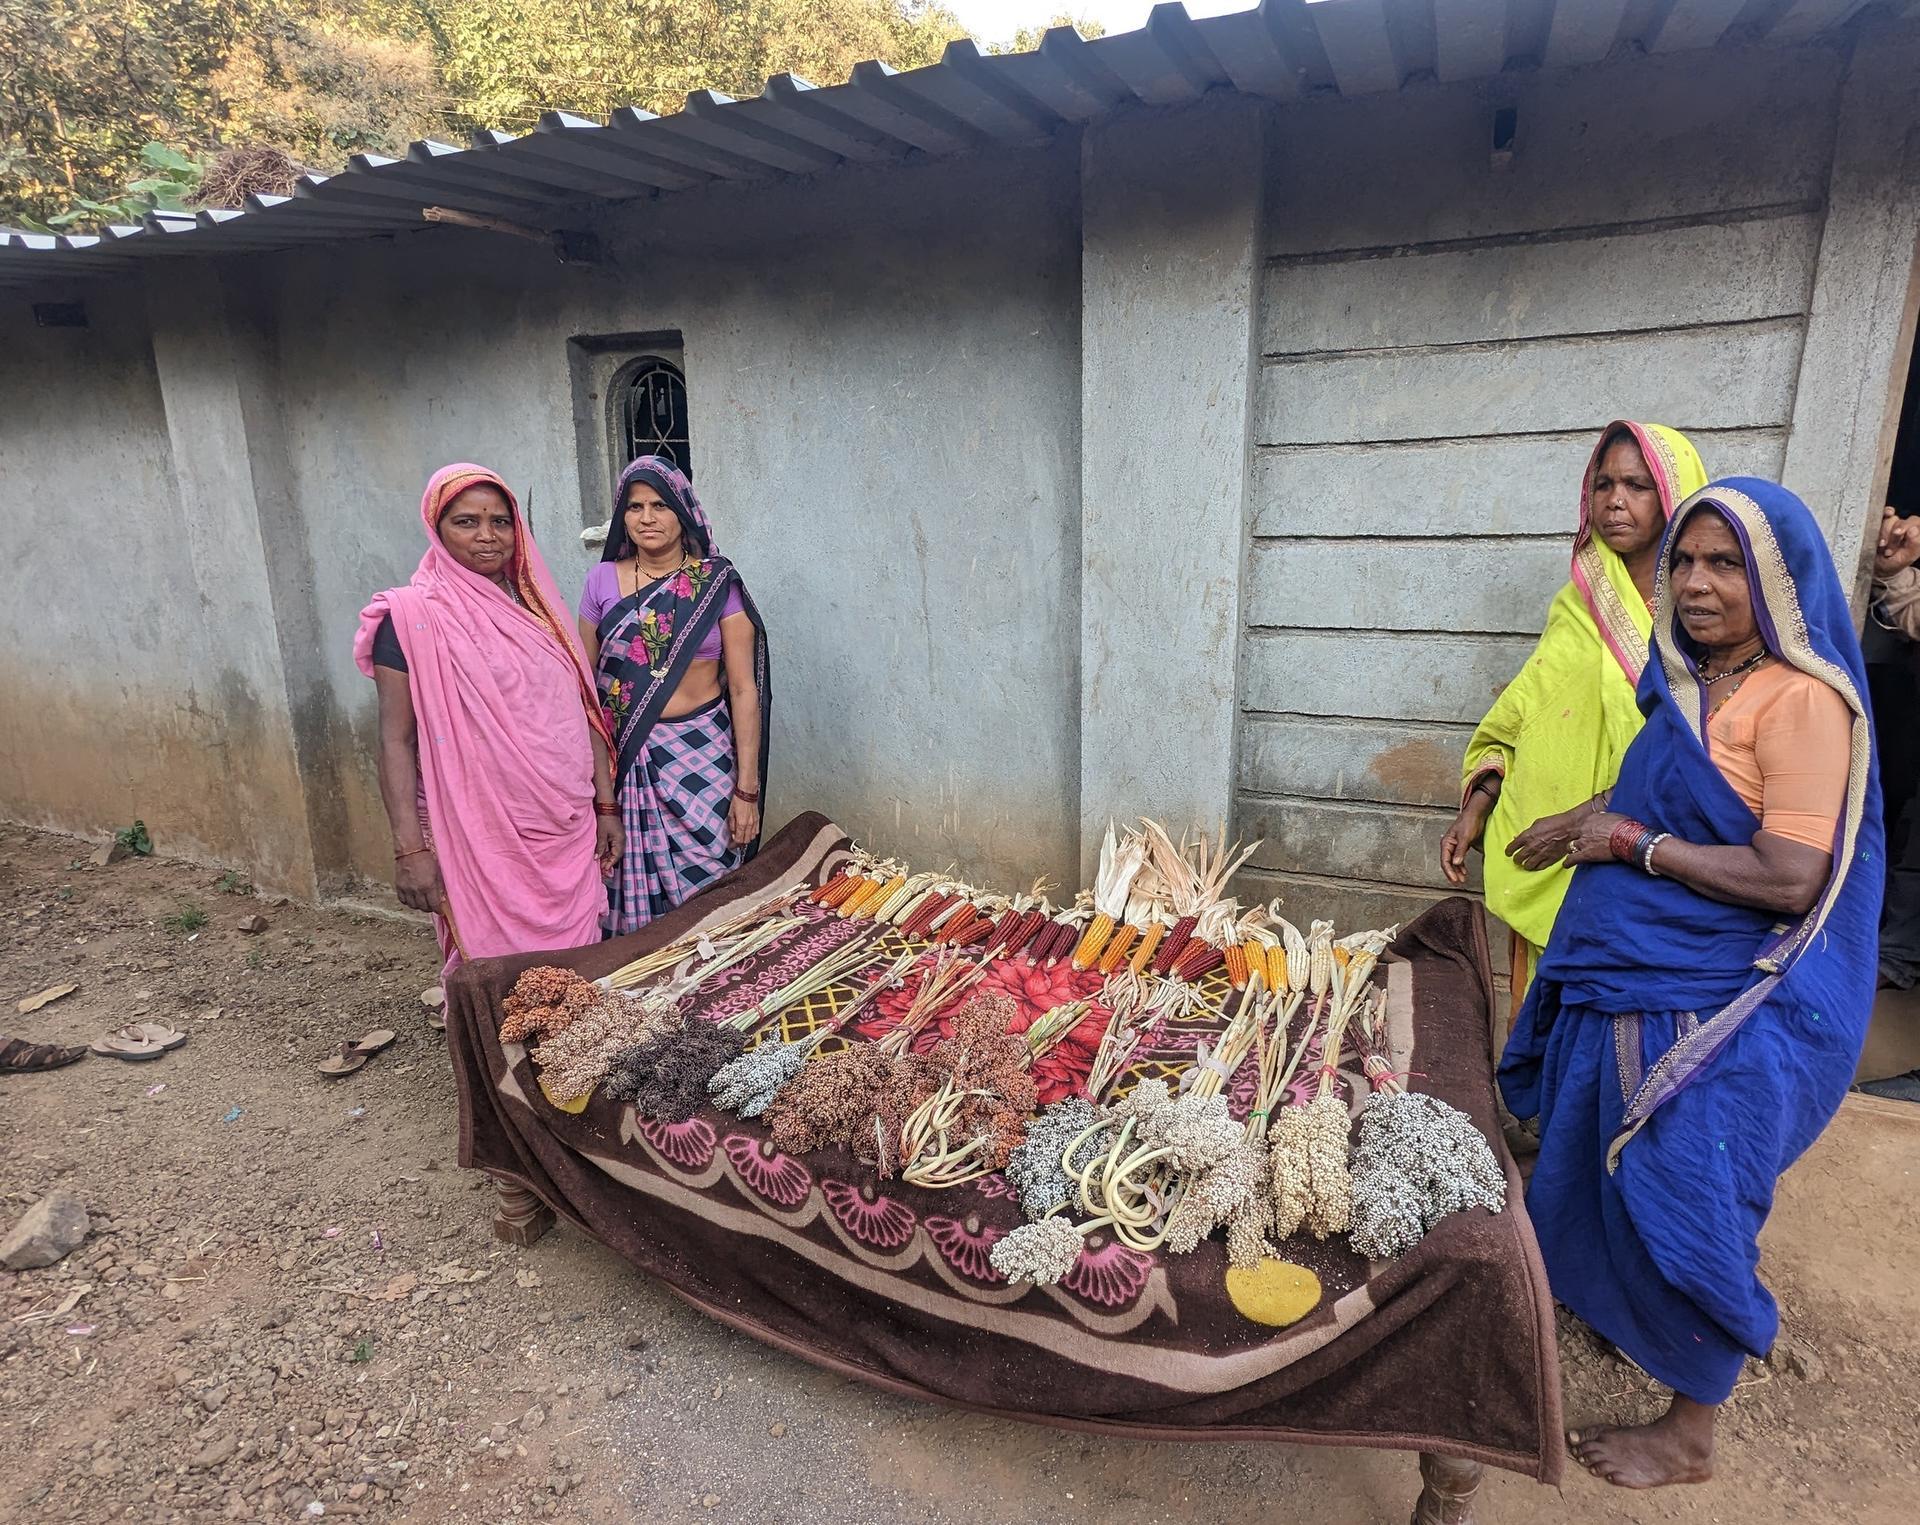 Community seed banks empower farmers and address climate risk in India - Alliance Bioversity International - CIAT